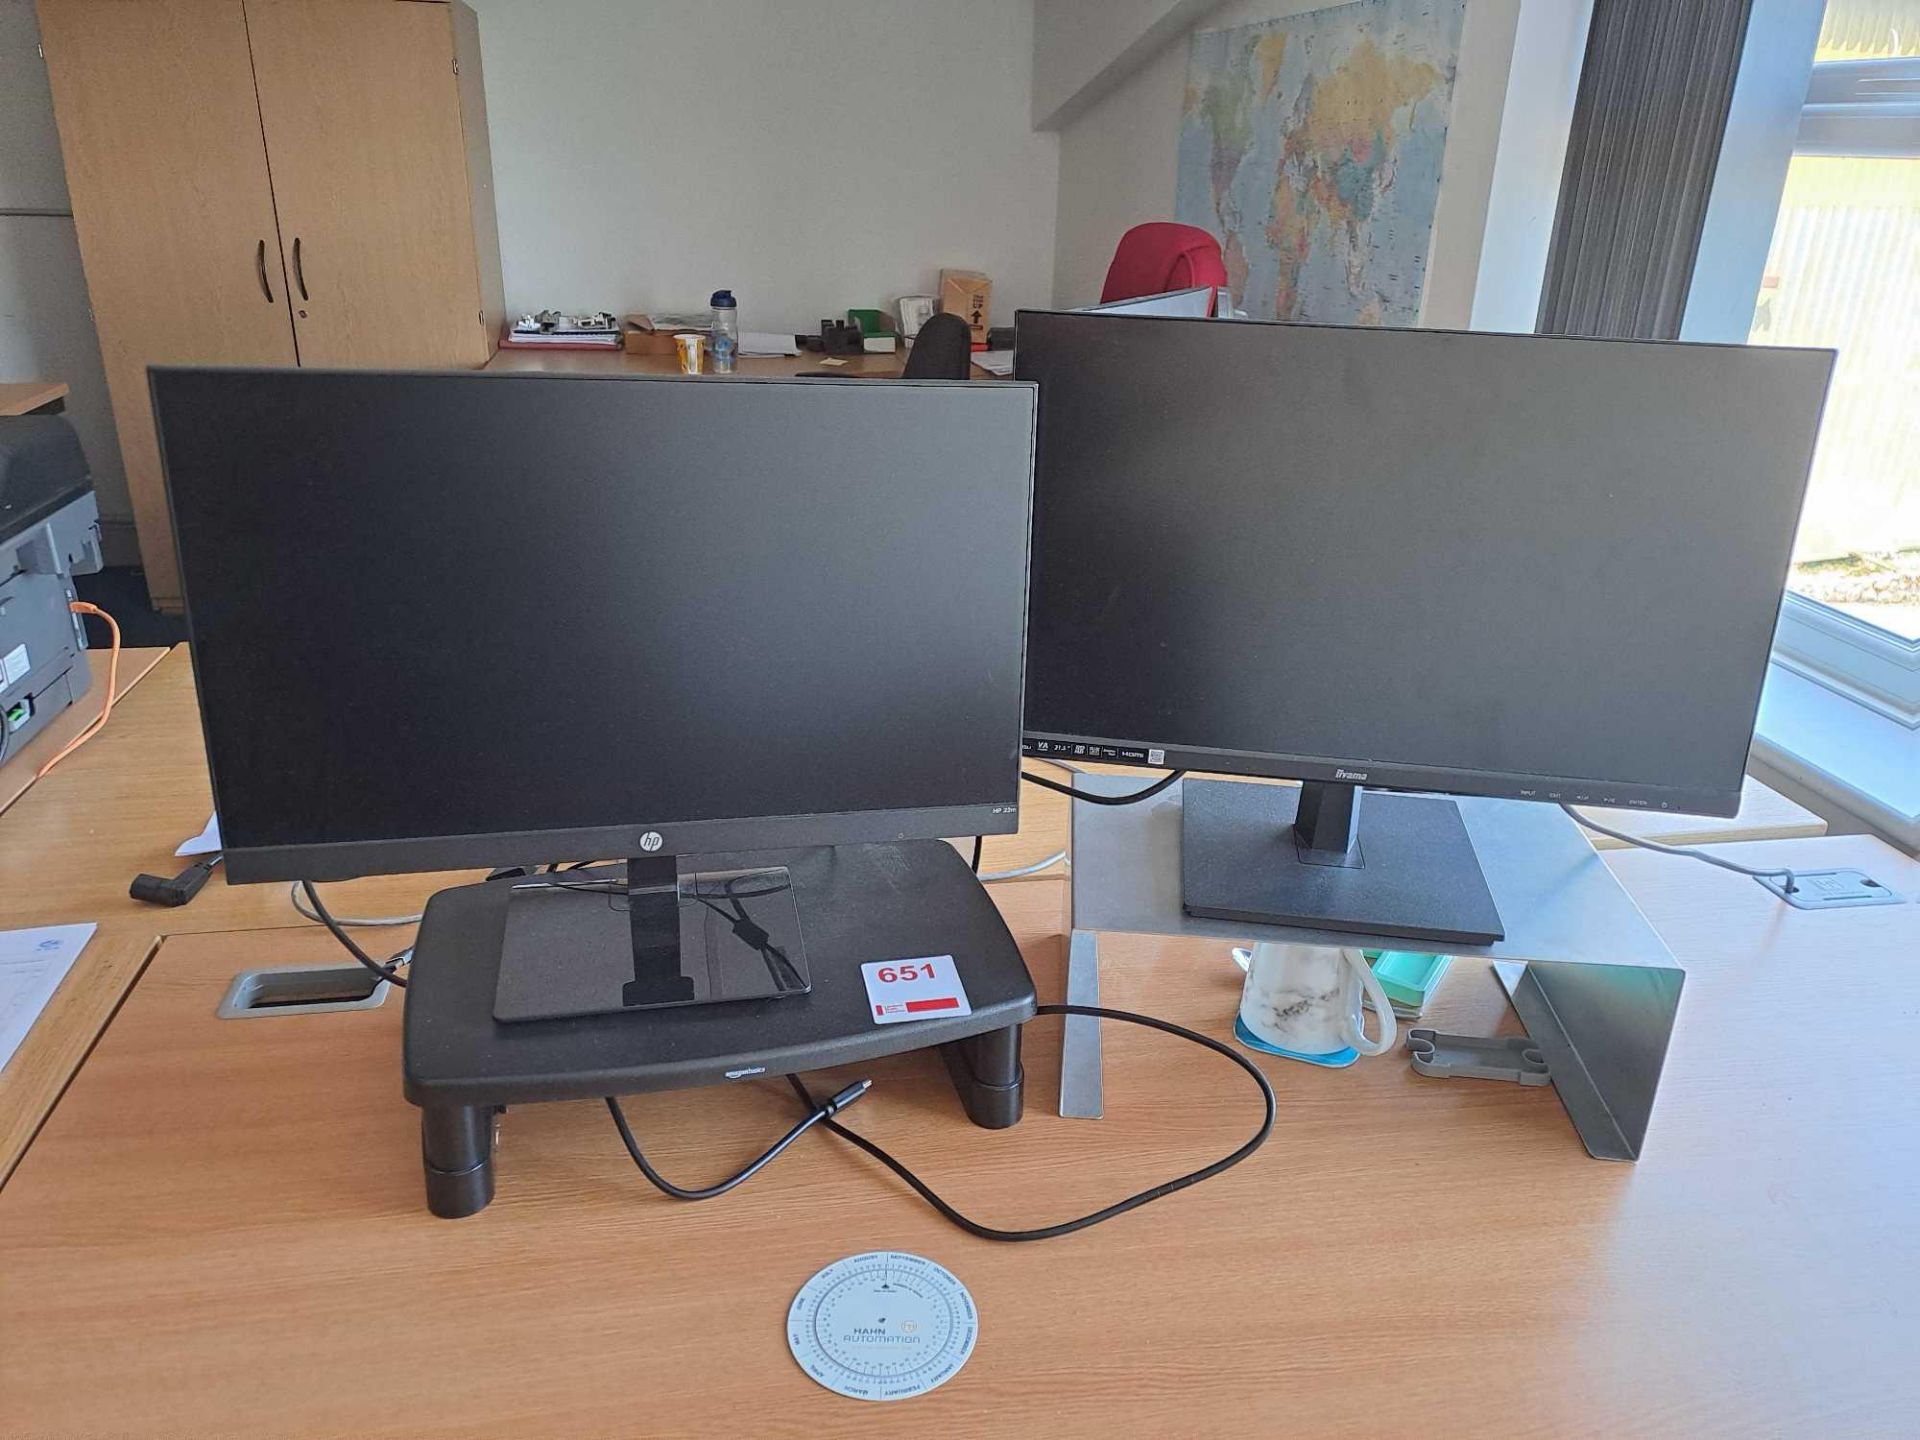 HP monitor and one Ilyama monitor, both with stands